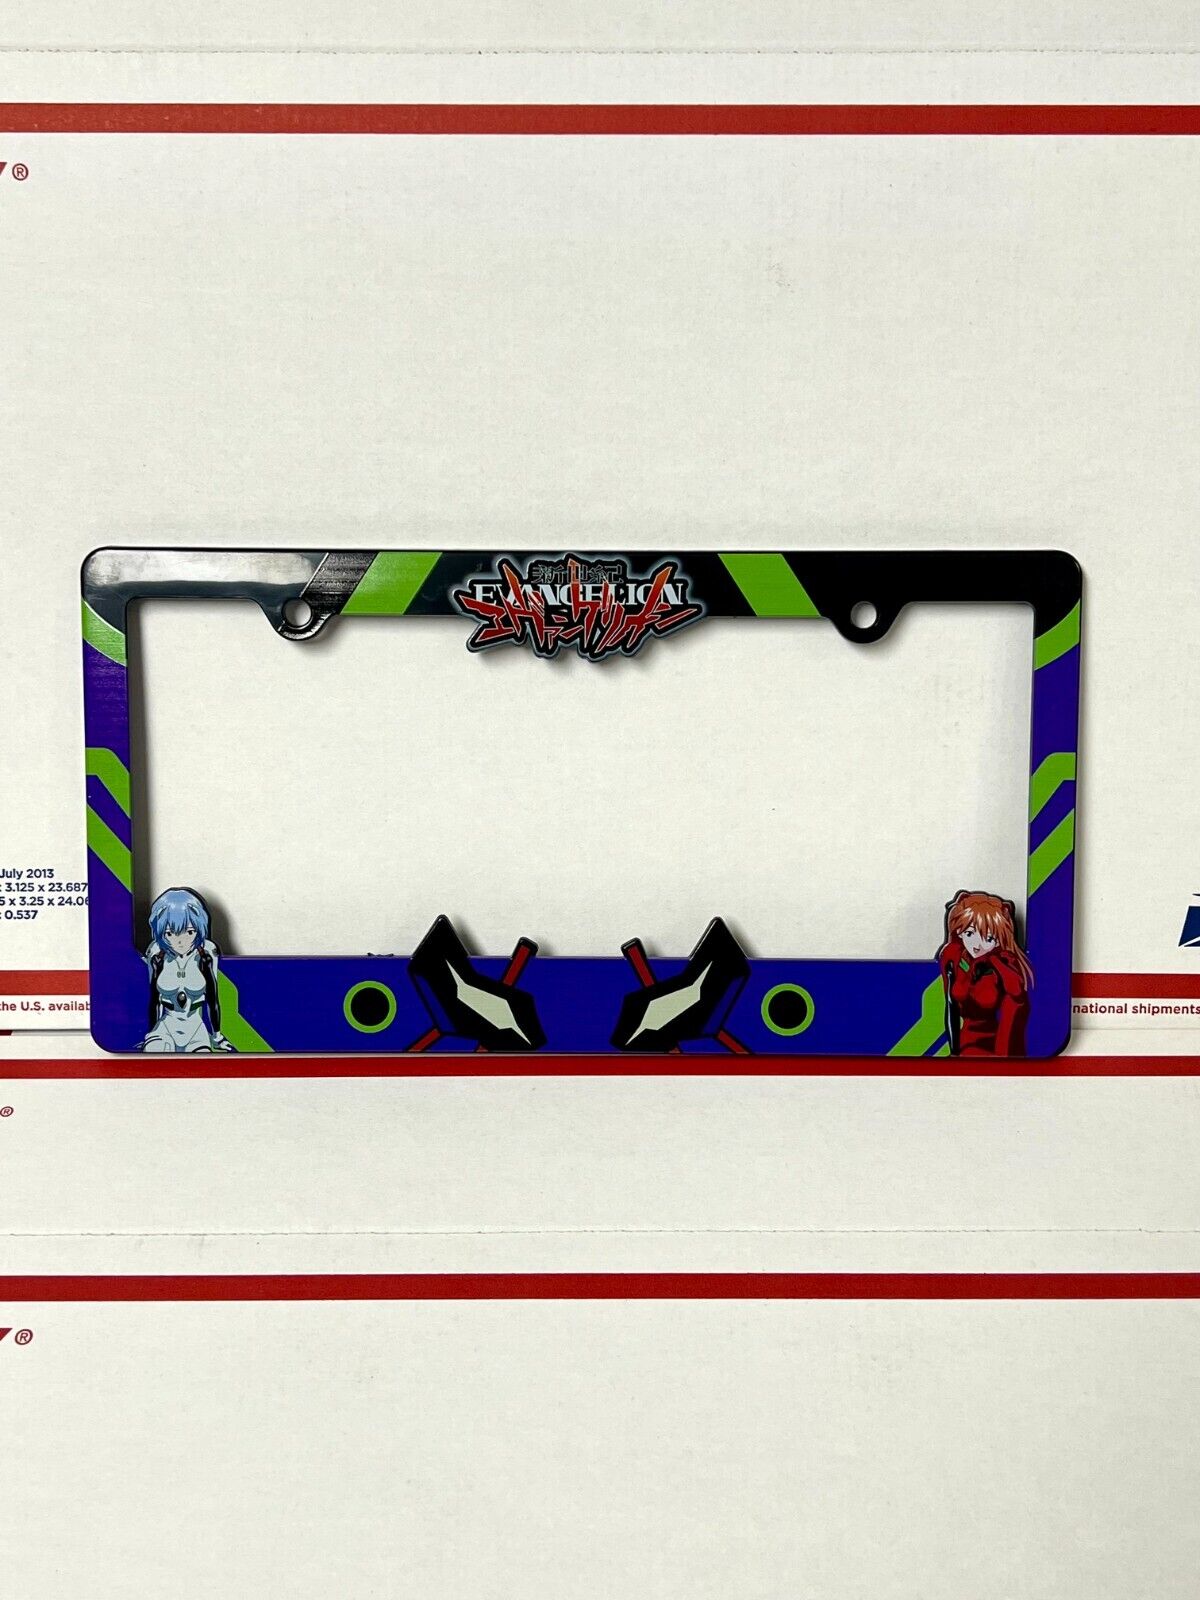 Neon Genesis Evangelion License Plate Frame featuring Asuka and Rei